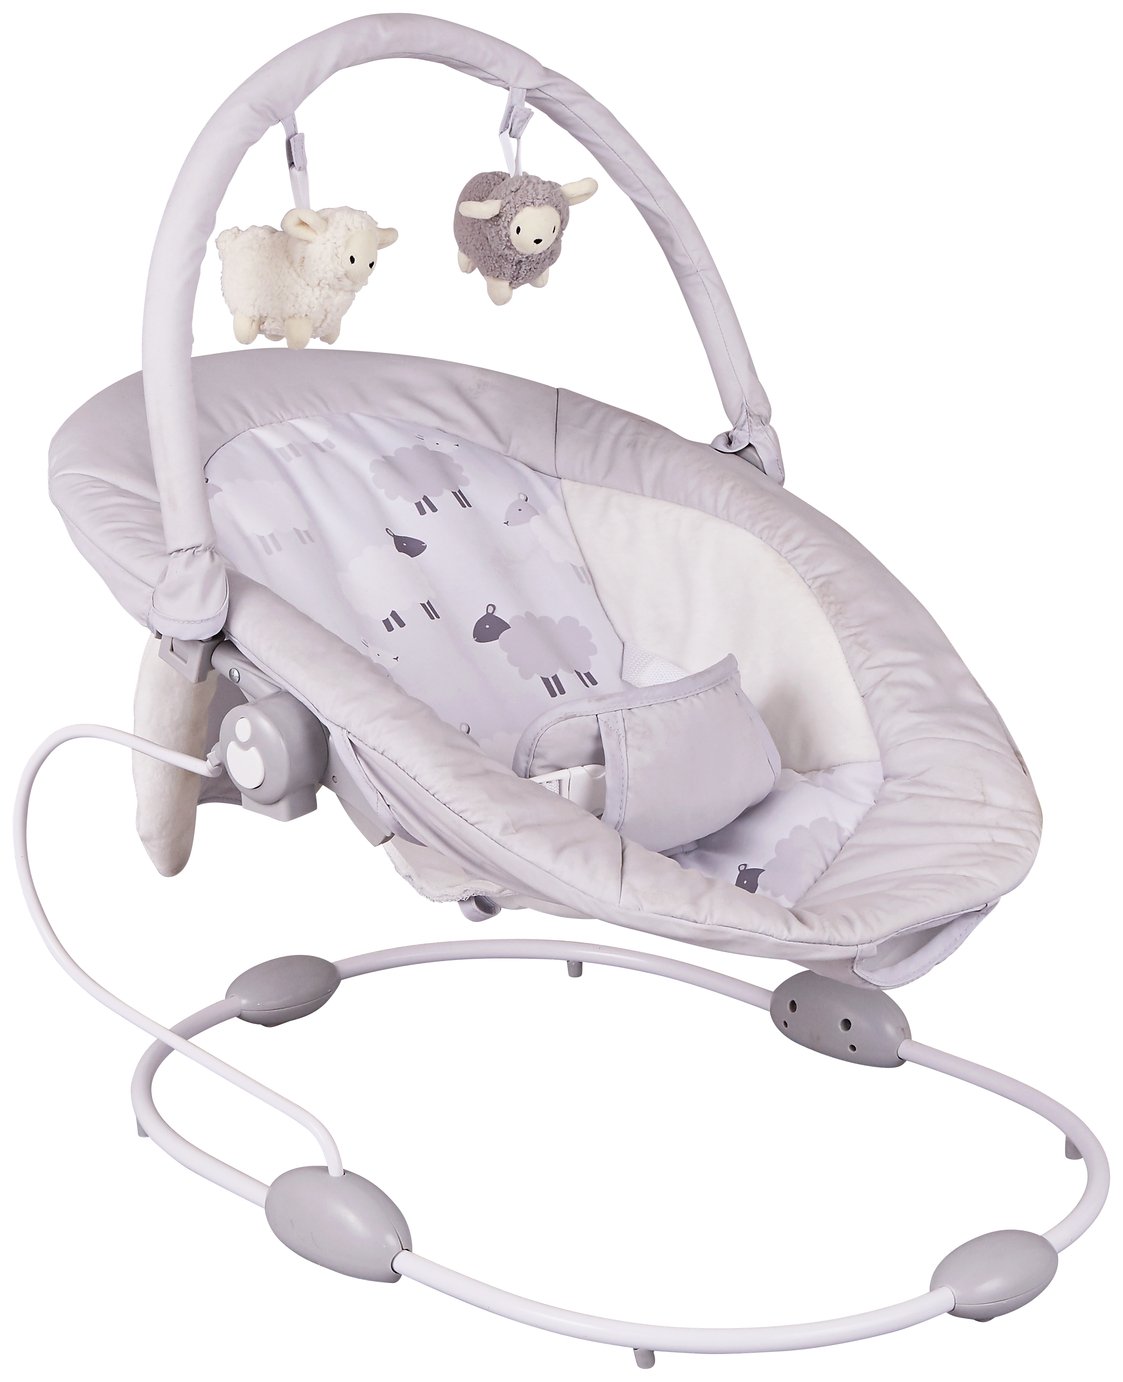 Cuggl Music & Sounds Bouncer review